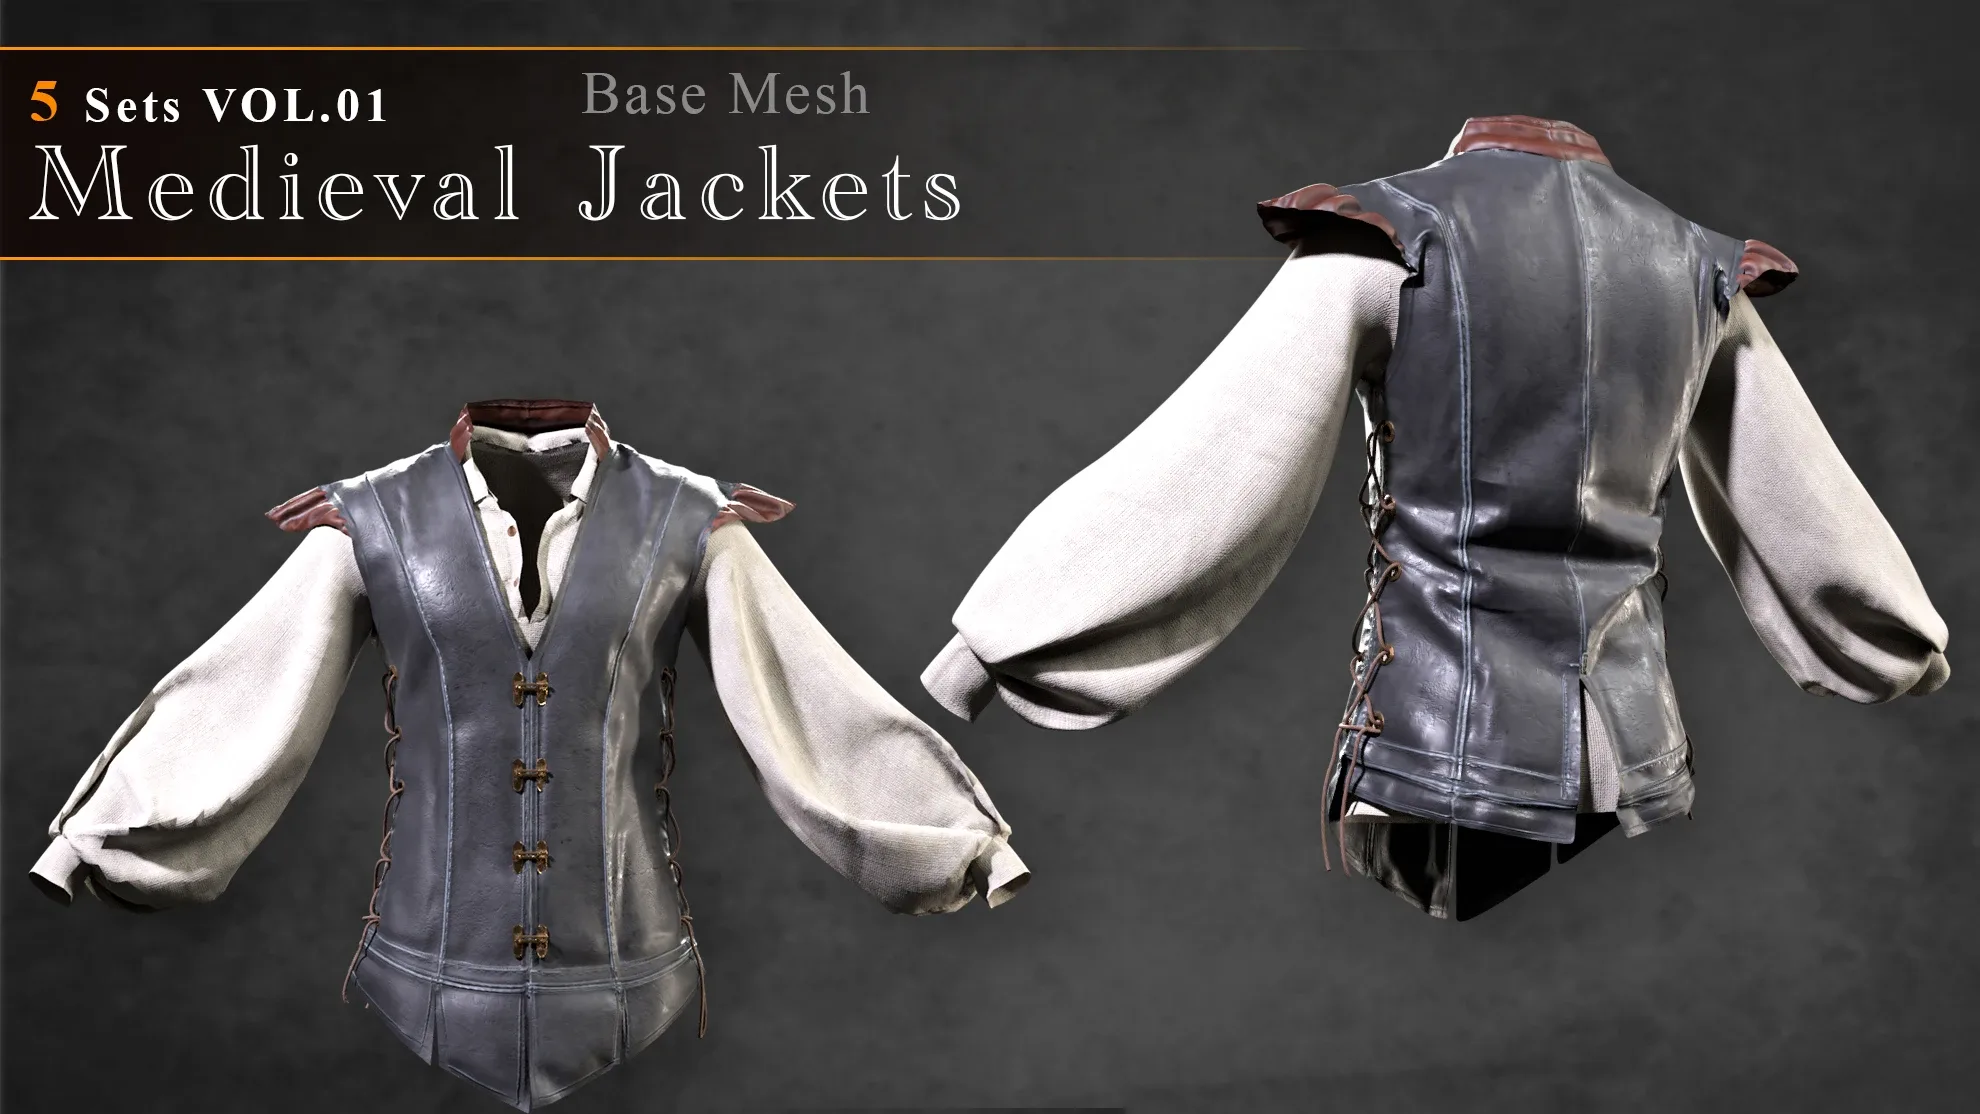 Medieval Style Jackets Base Mesh Vol 01